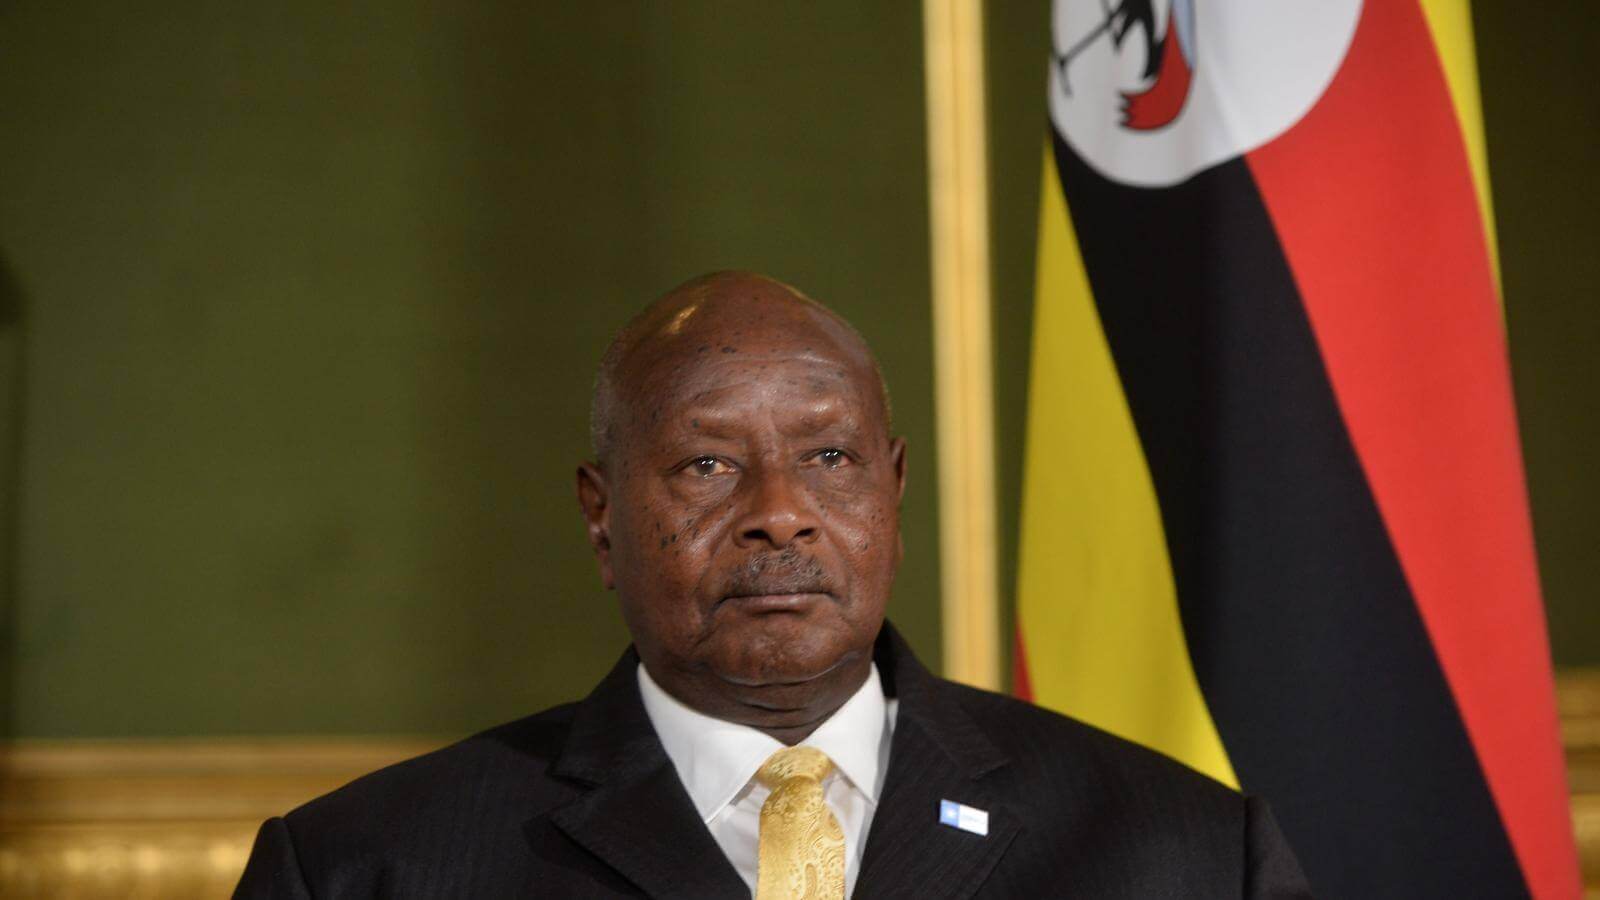 Ugandan Government Increases Roadblocks for Press as Museveni Chases Four Decades in Power